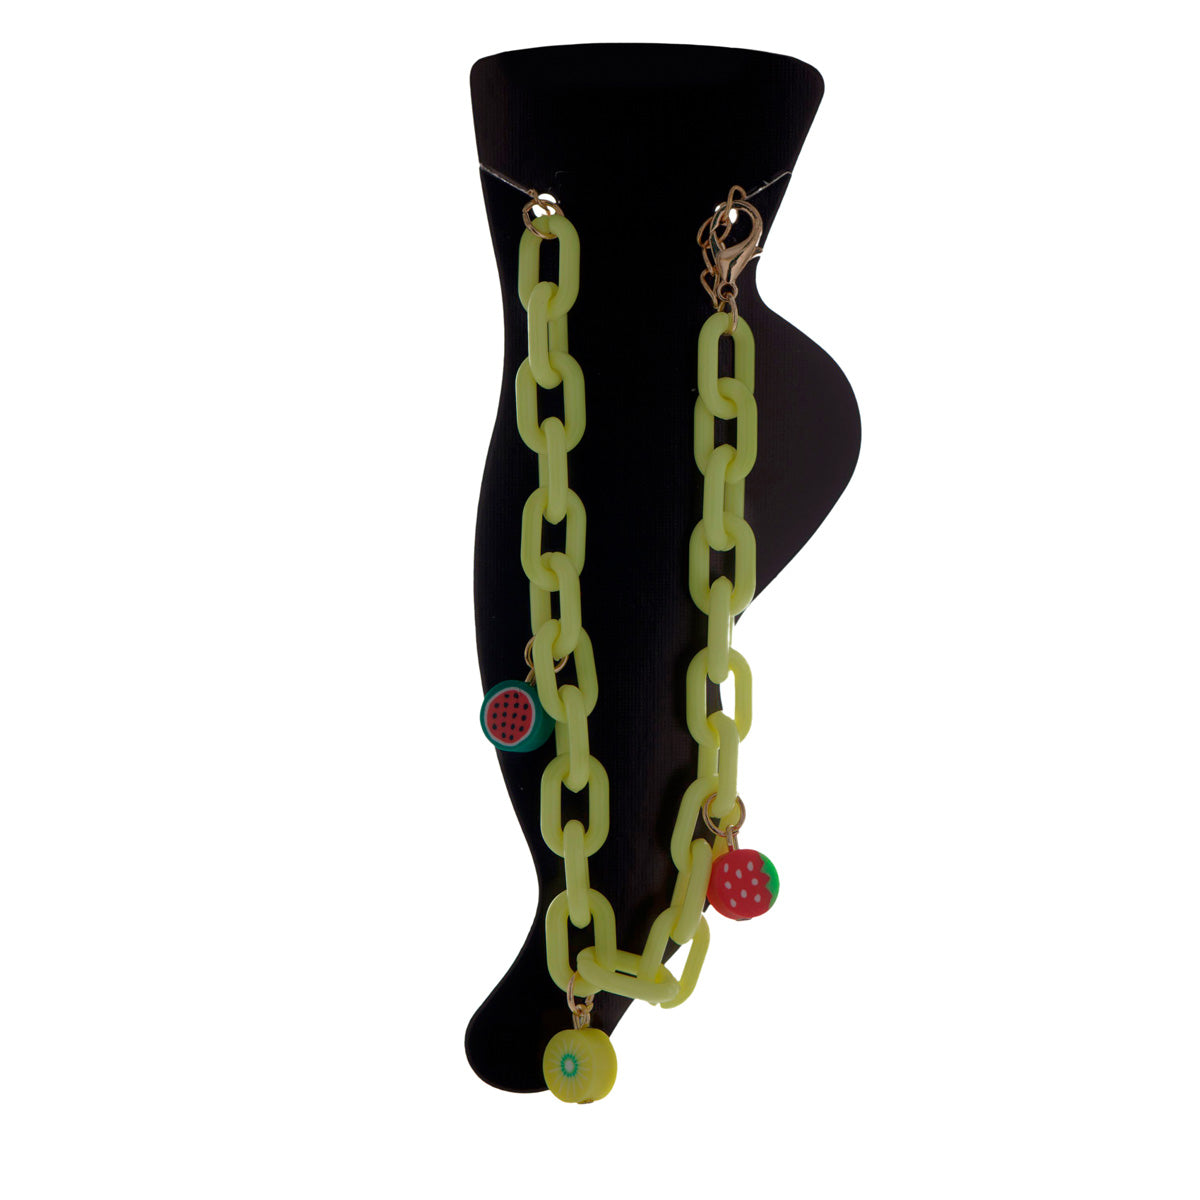 Plastic ankle chain ankle jewelry with fruit